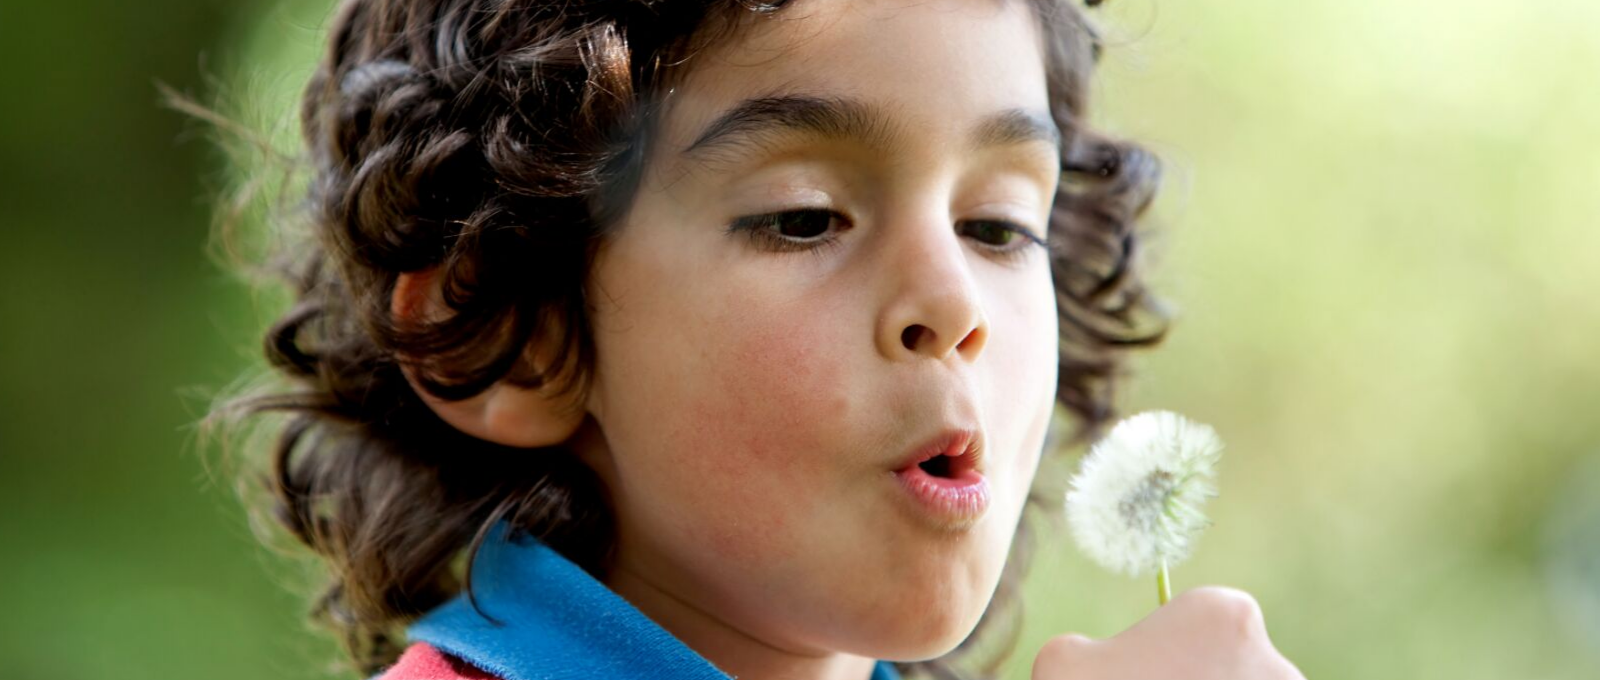 Exploring nature with a child blowing a dandelion